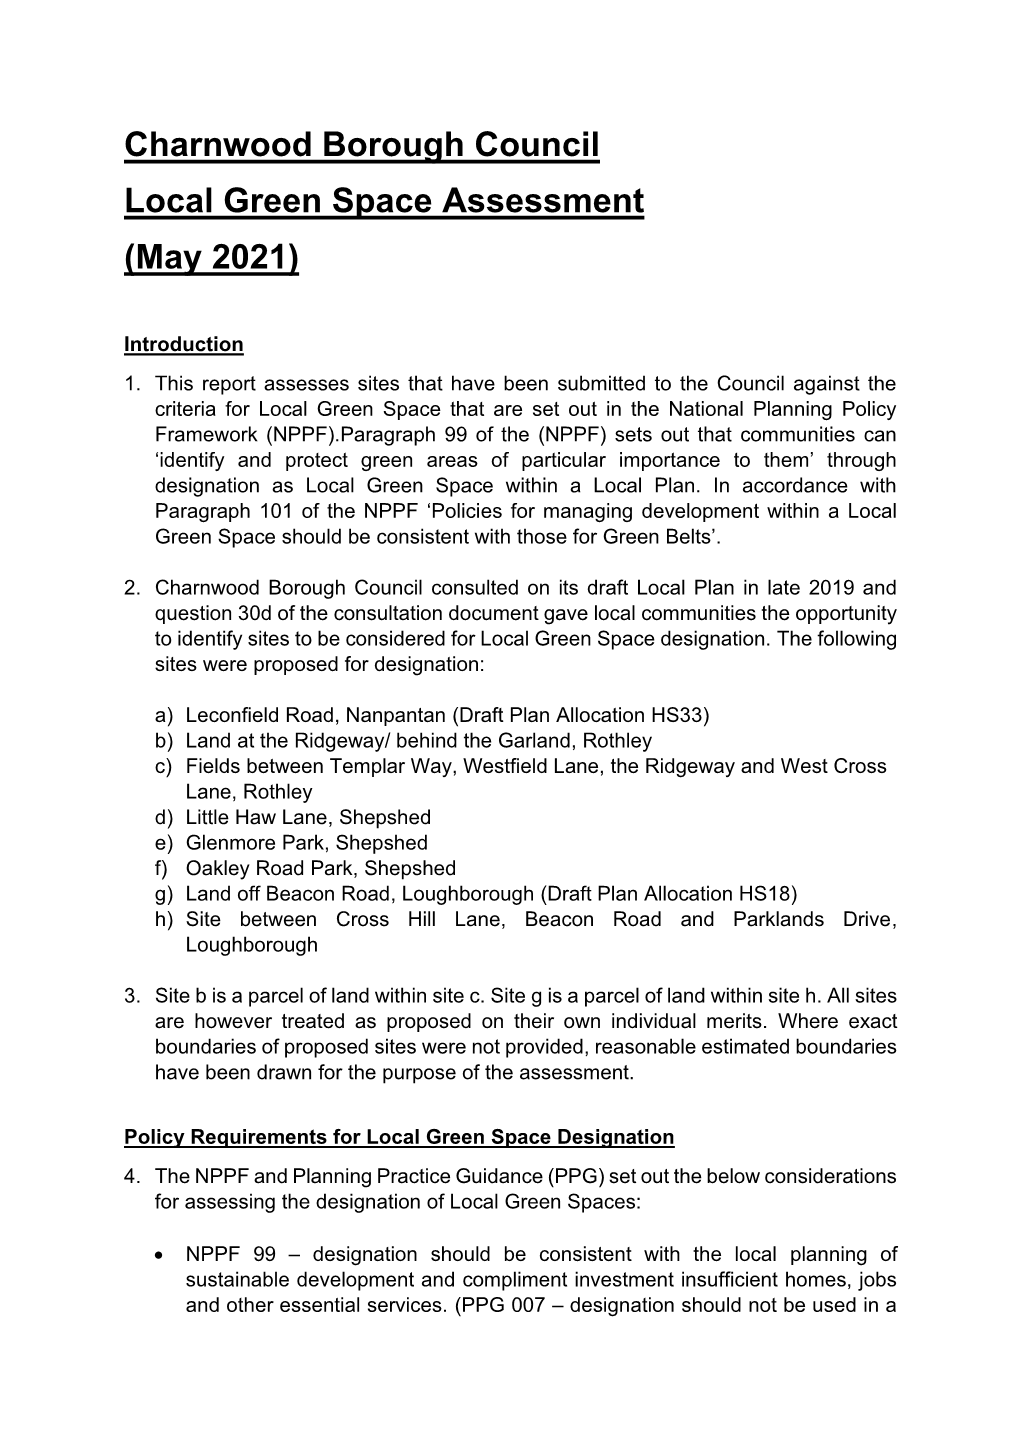 Charnwood Borough Council Local Green Space Assessment (May 2021)